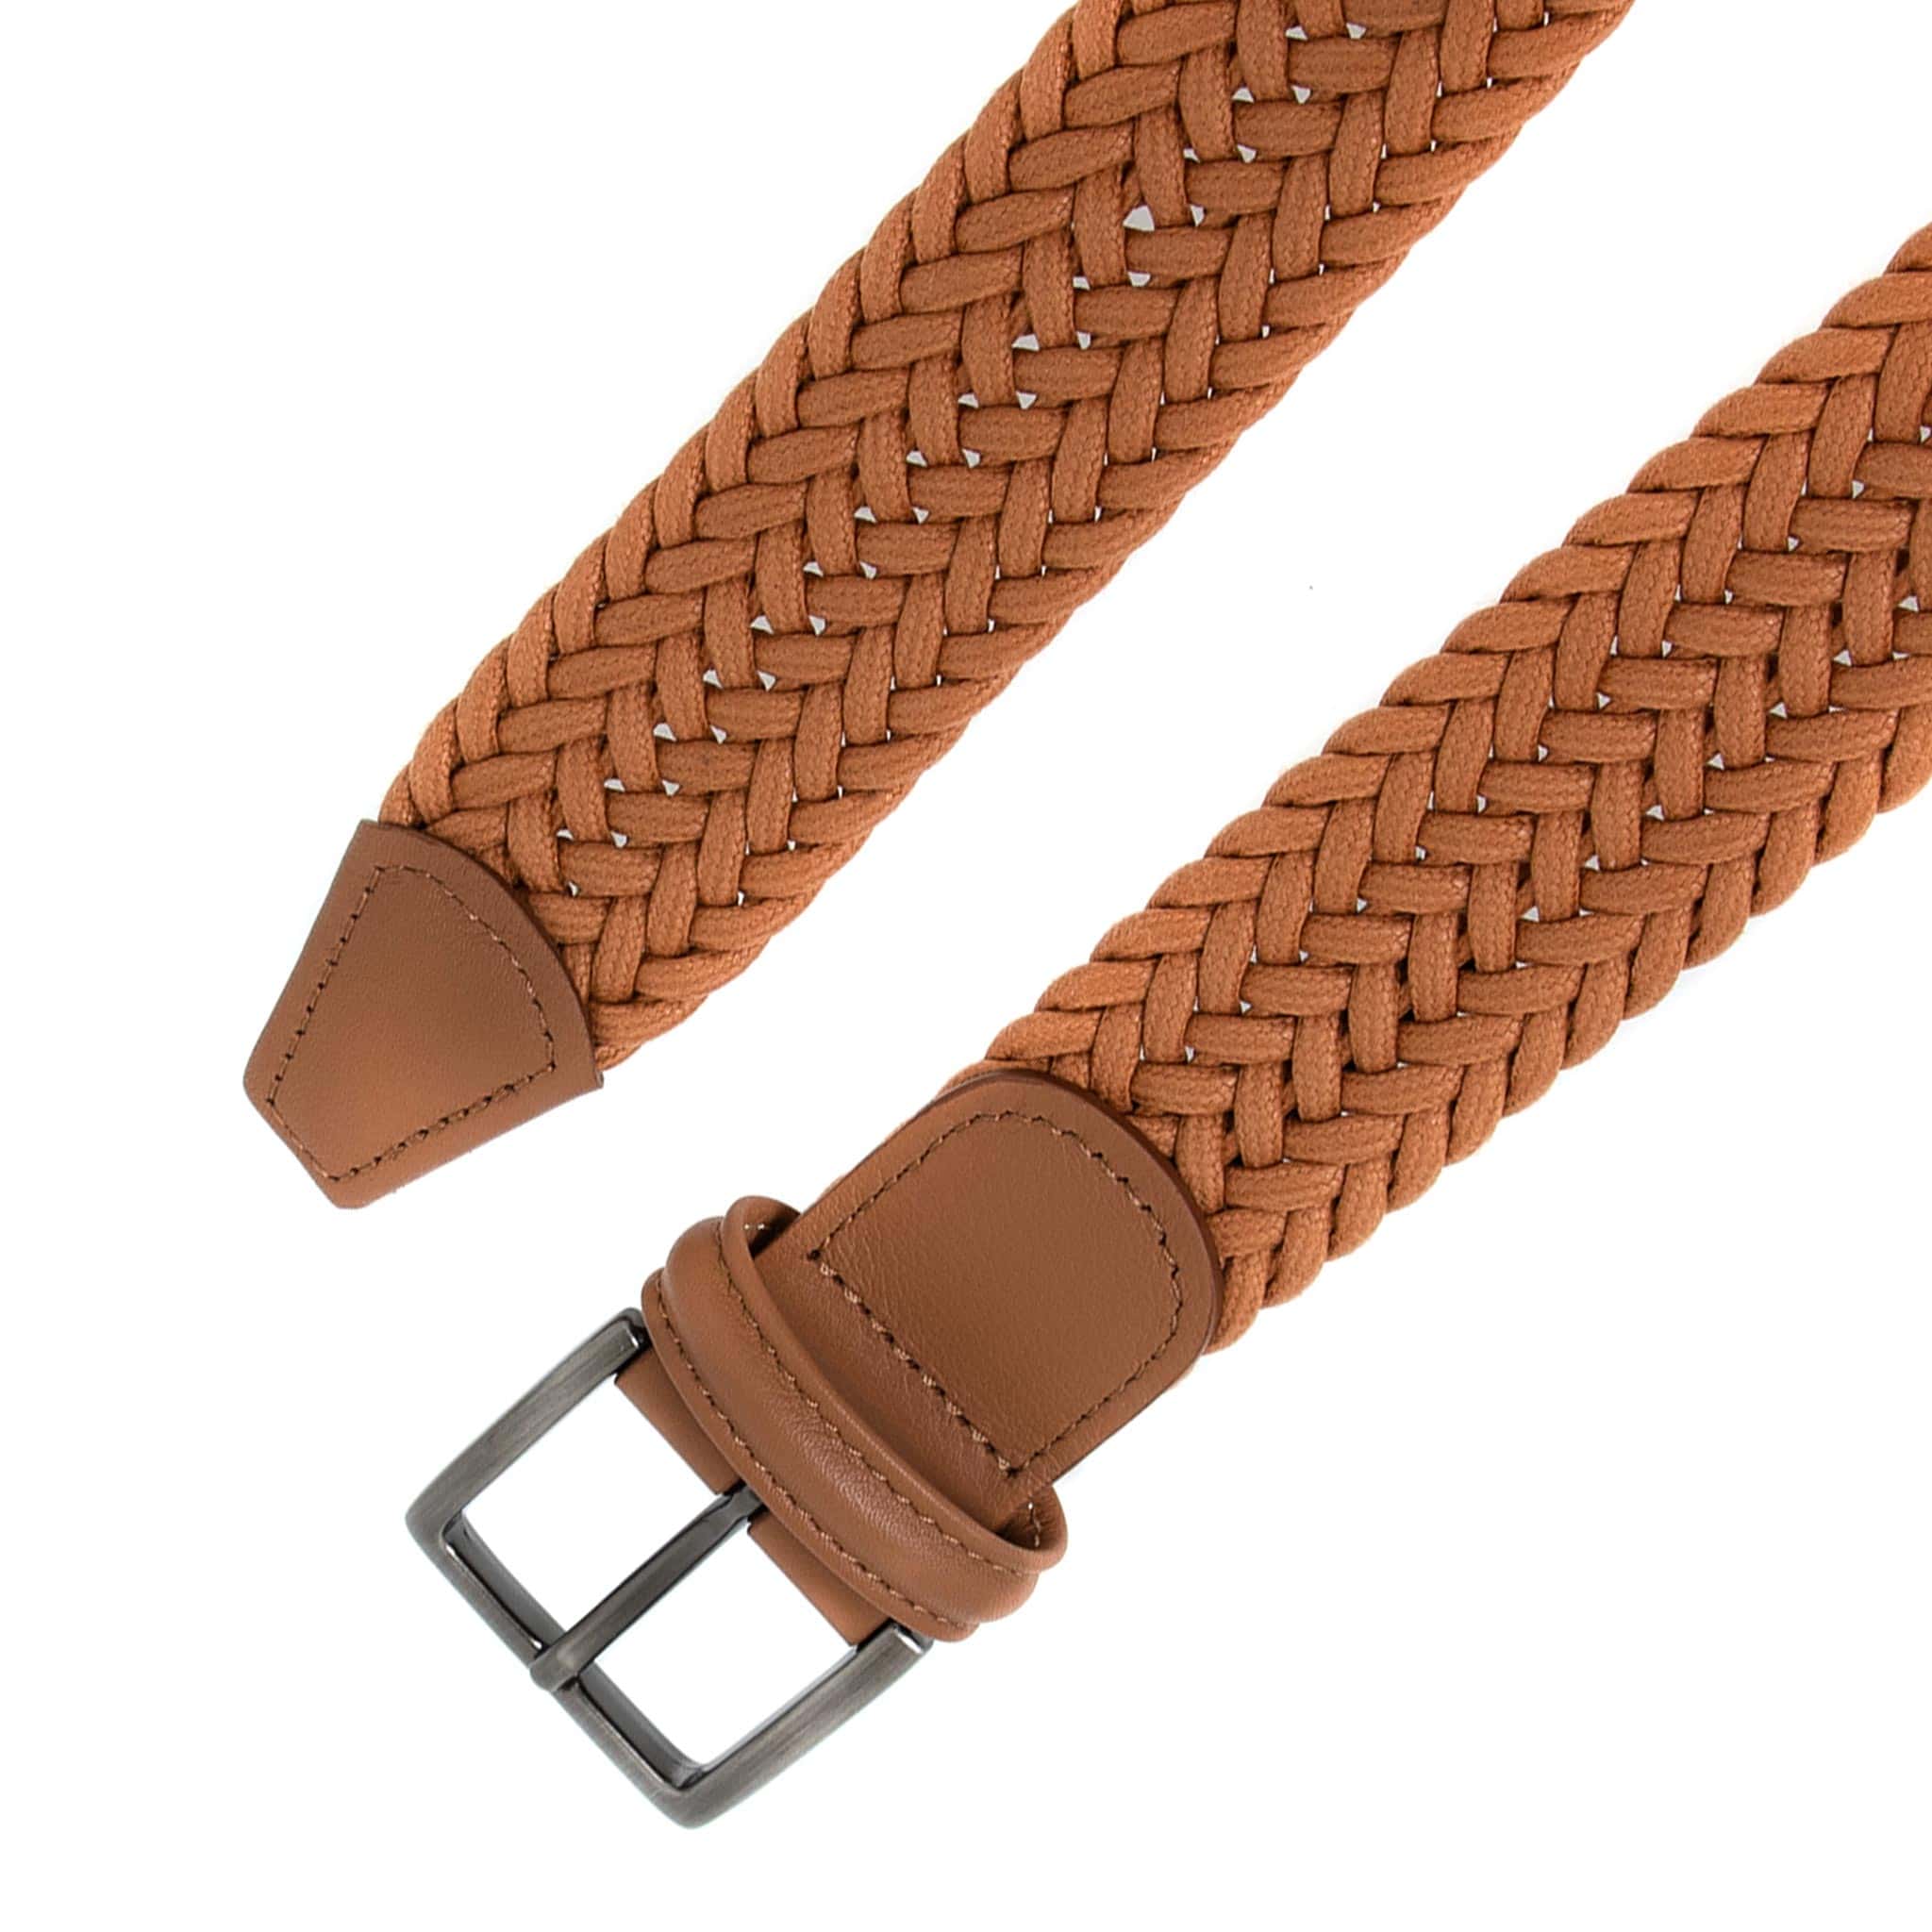 ANDERSONS CASUAL WOVEN WAXED COTTON BELT WITH NAPPA TRIMS B0667